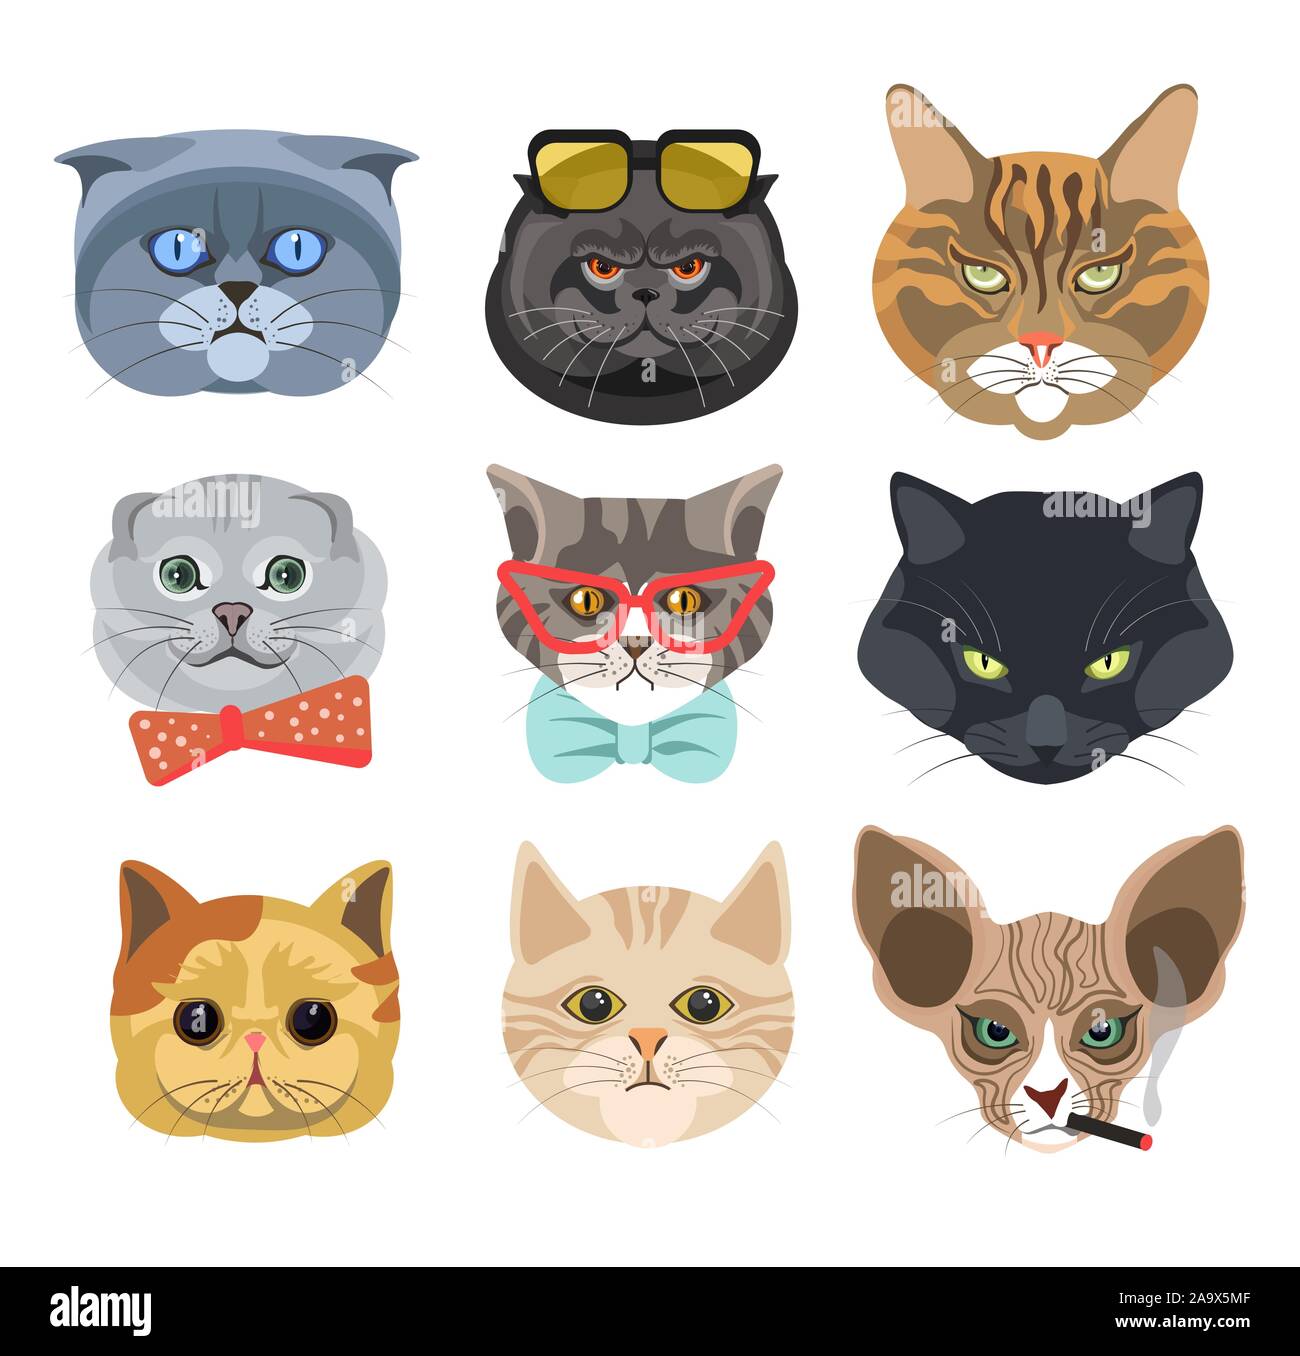 Cats faces wearing glasses and bows or smoking cigarette isolated icons Stock Vector